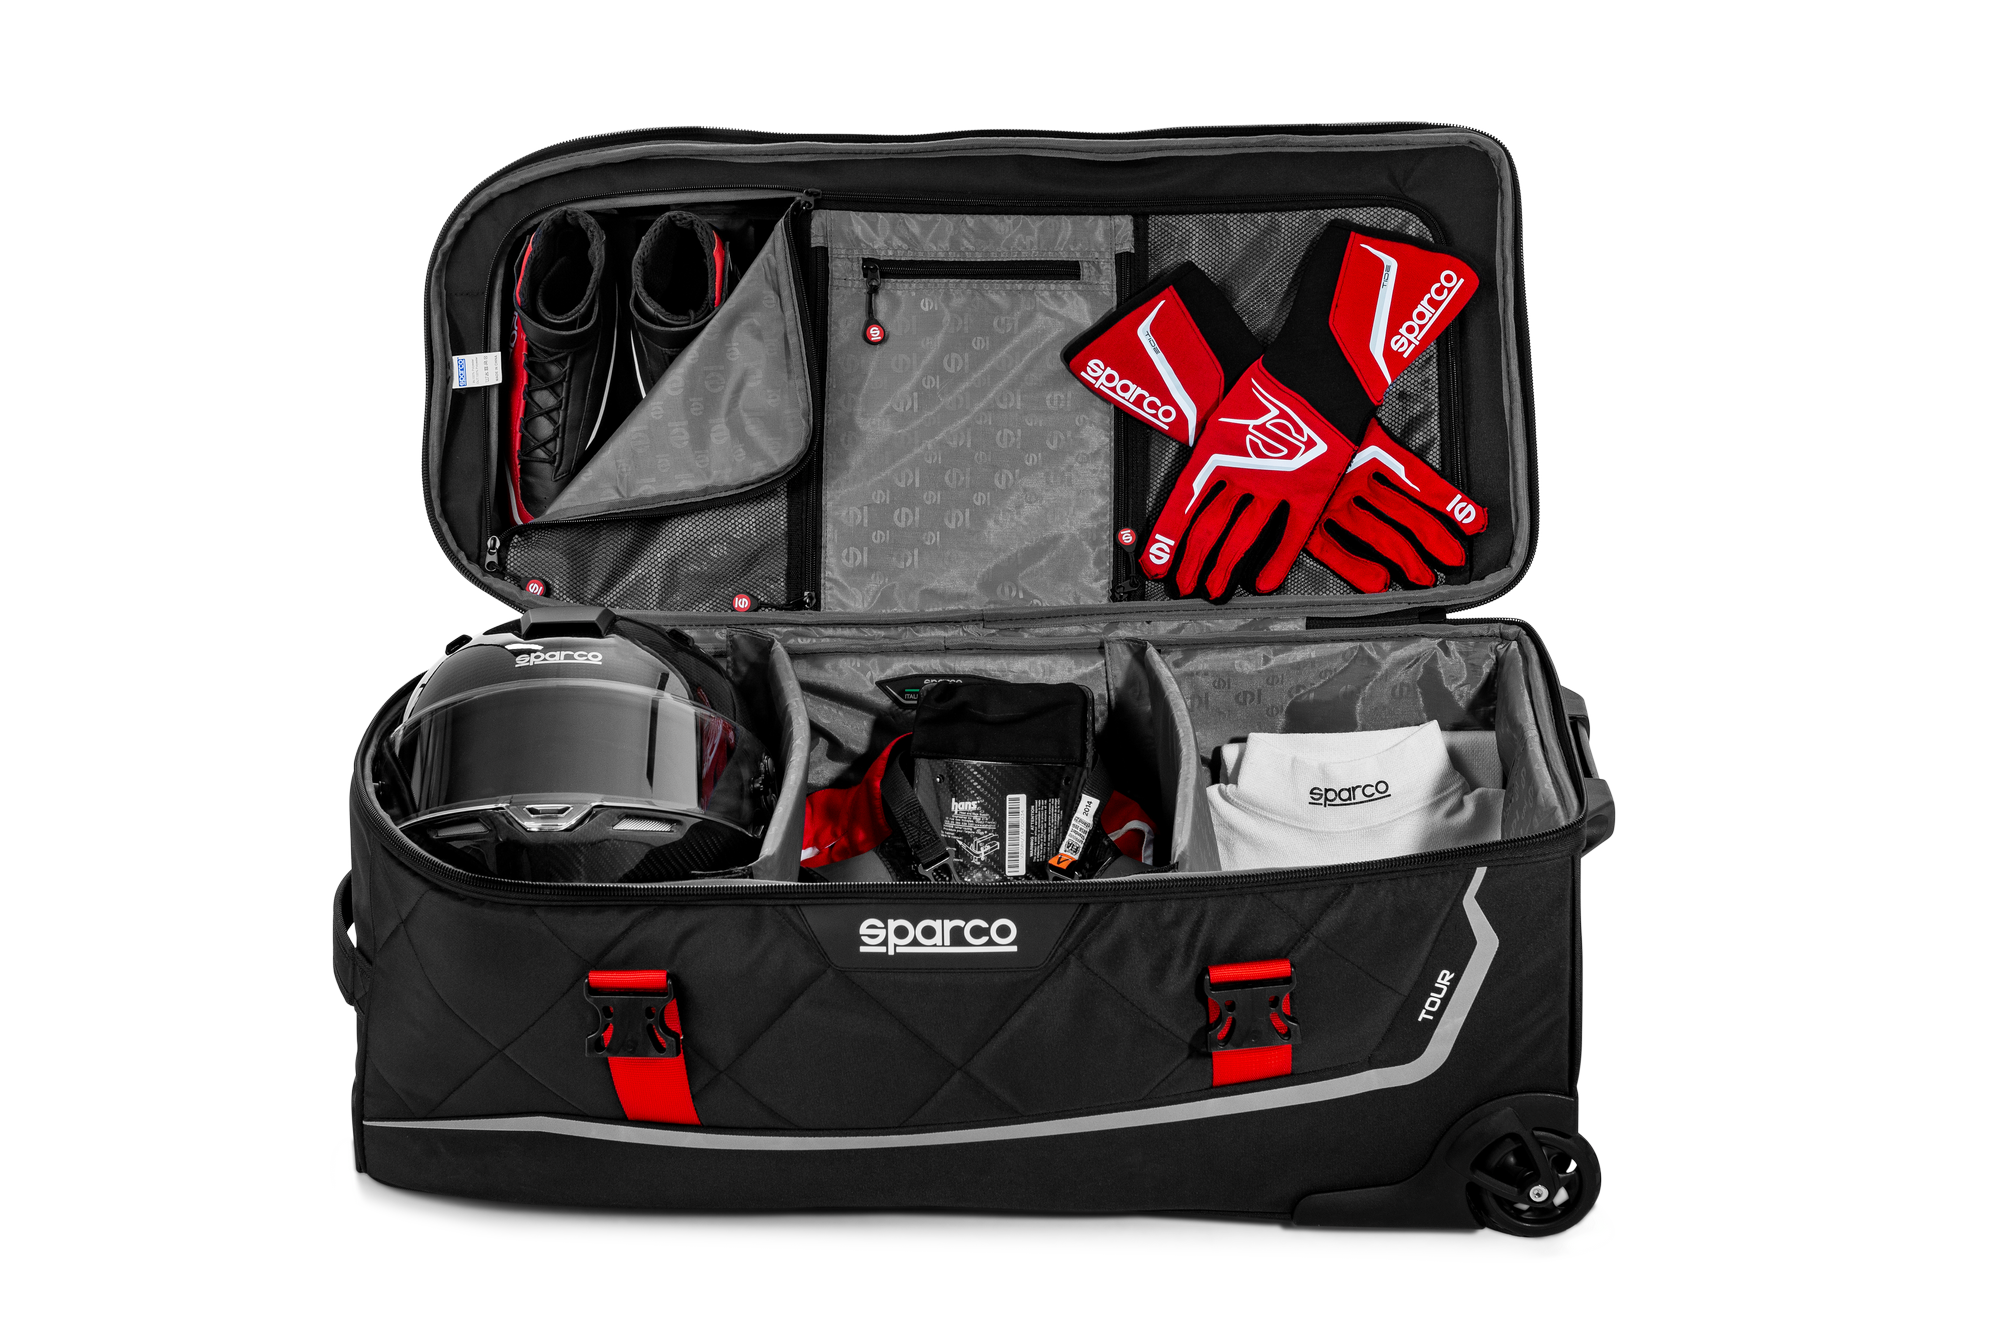 Trolley bag Sparco Tour Black Red